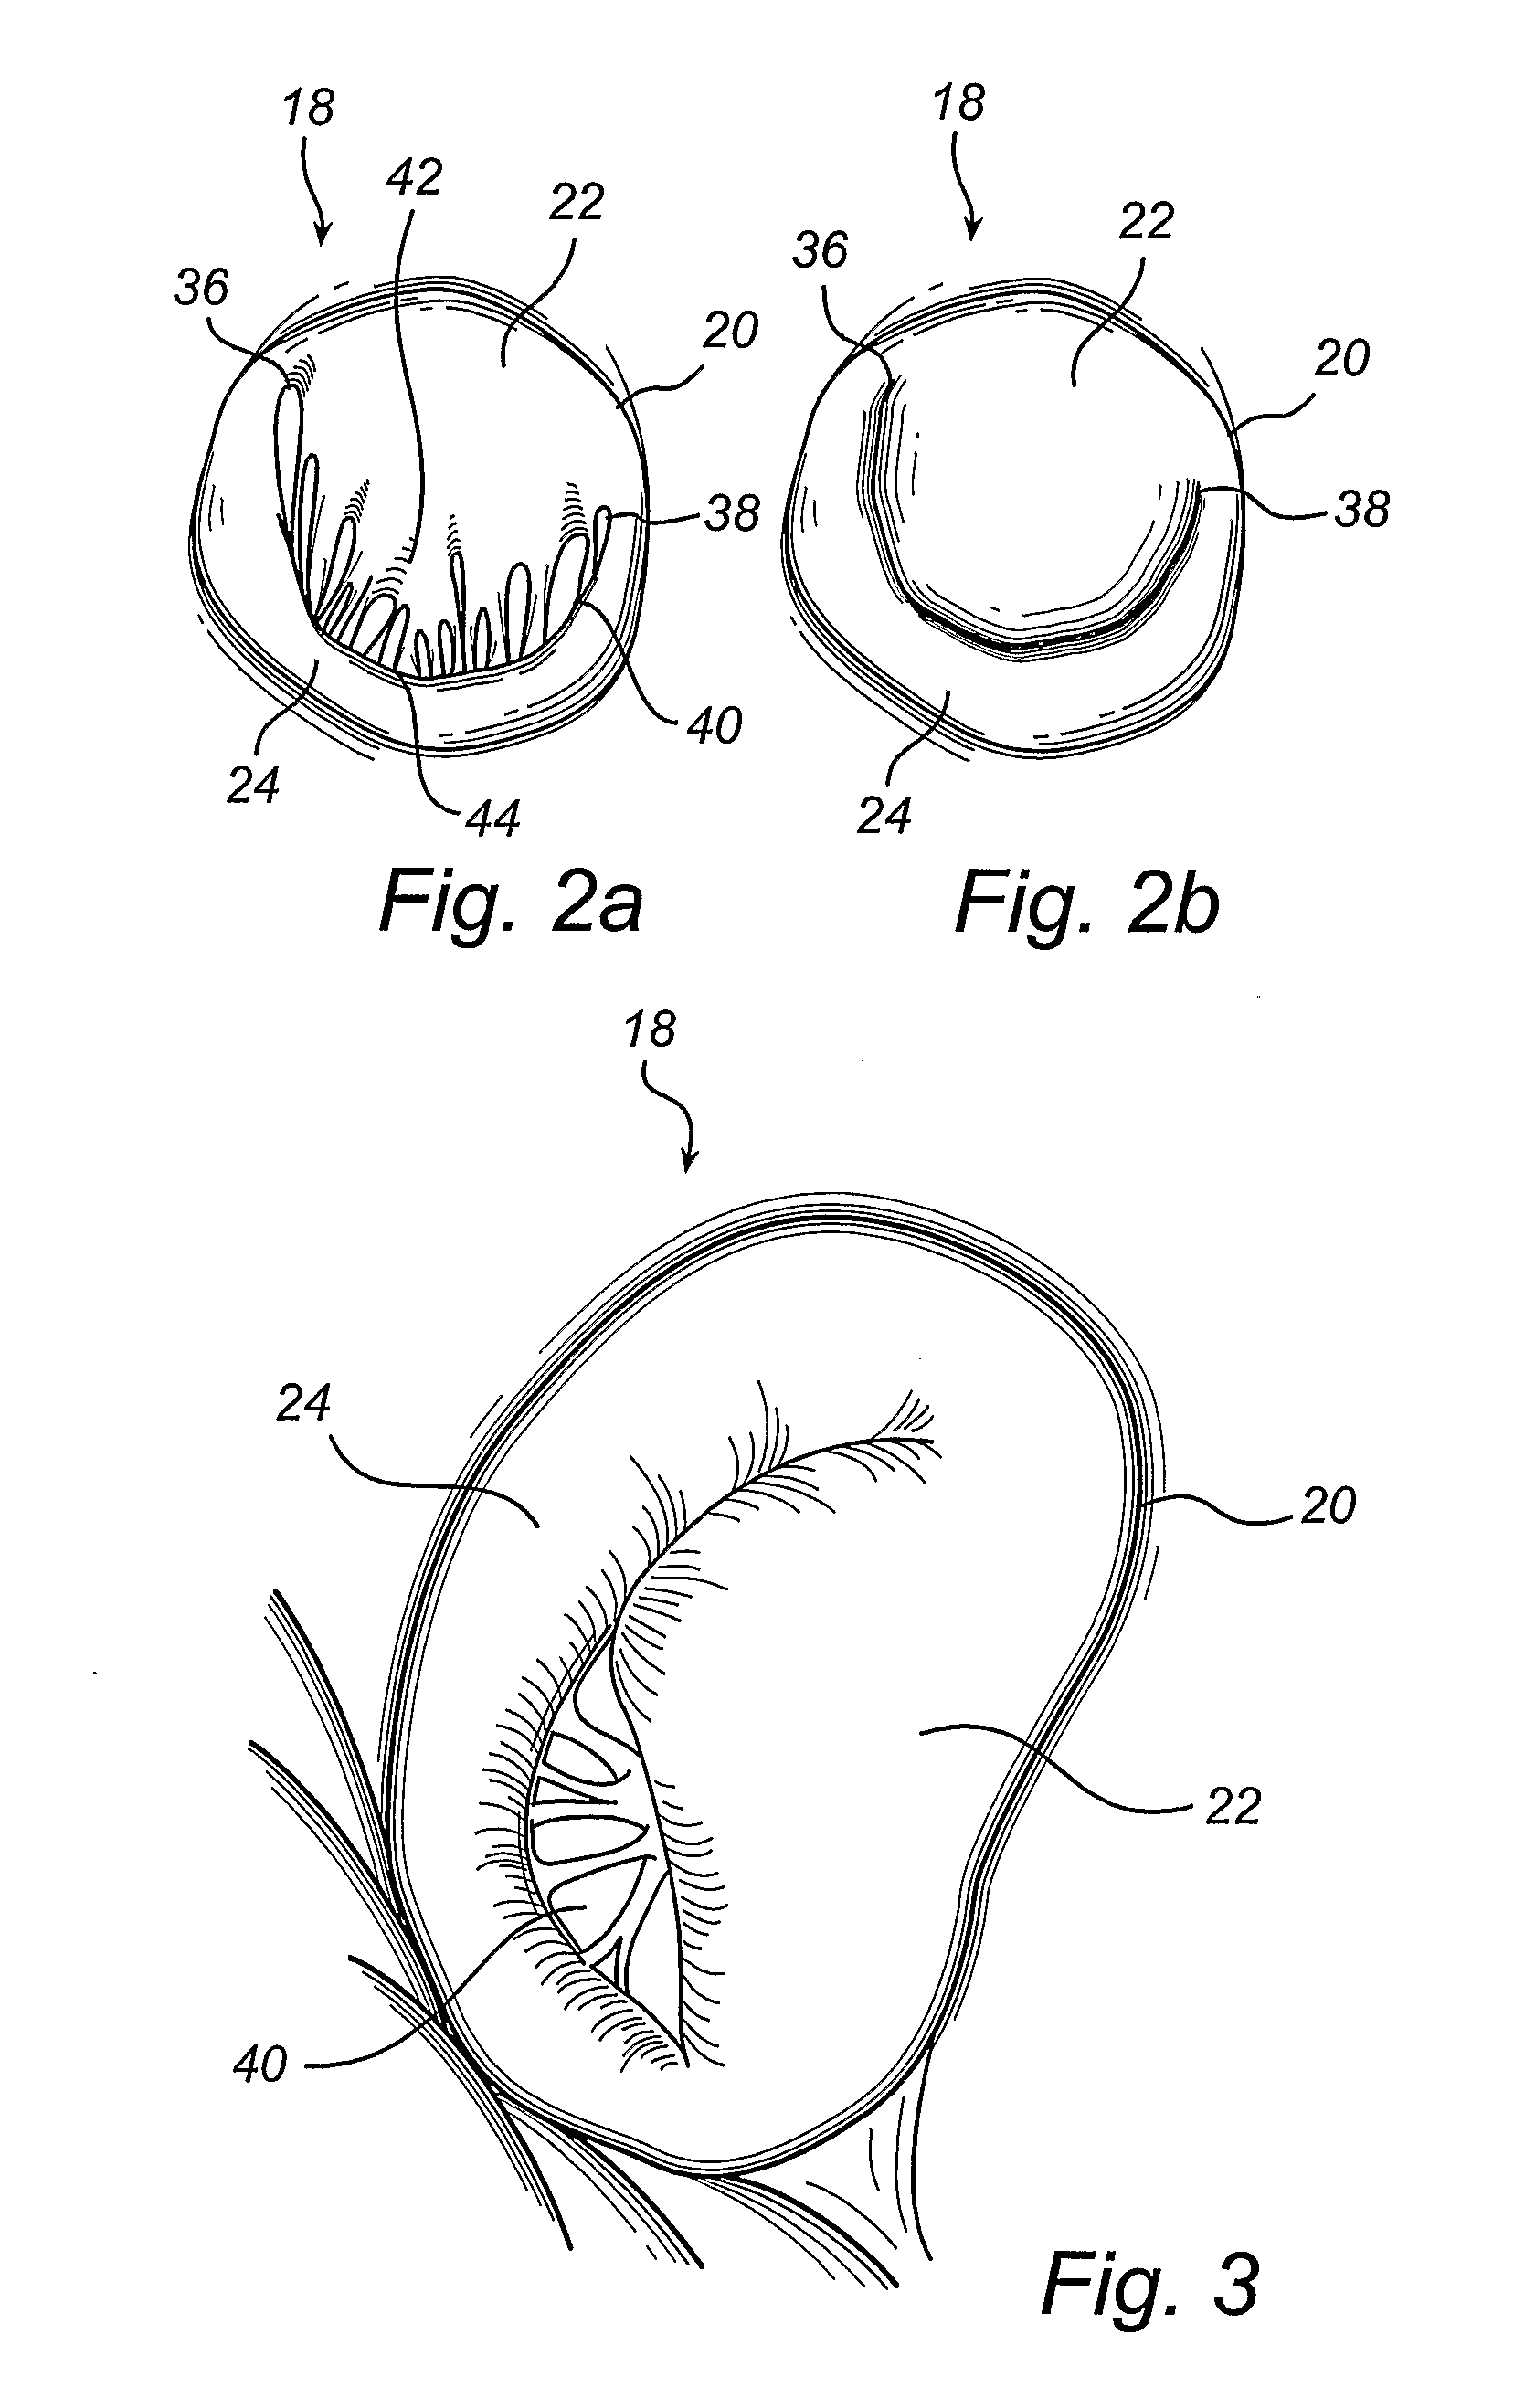 Device and Method for Improving the Function of a Heart Valve